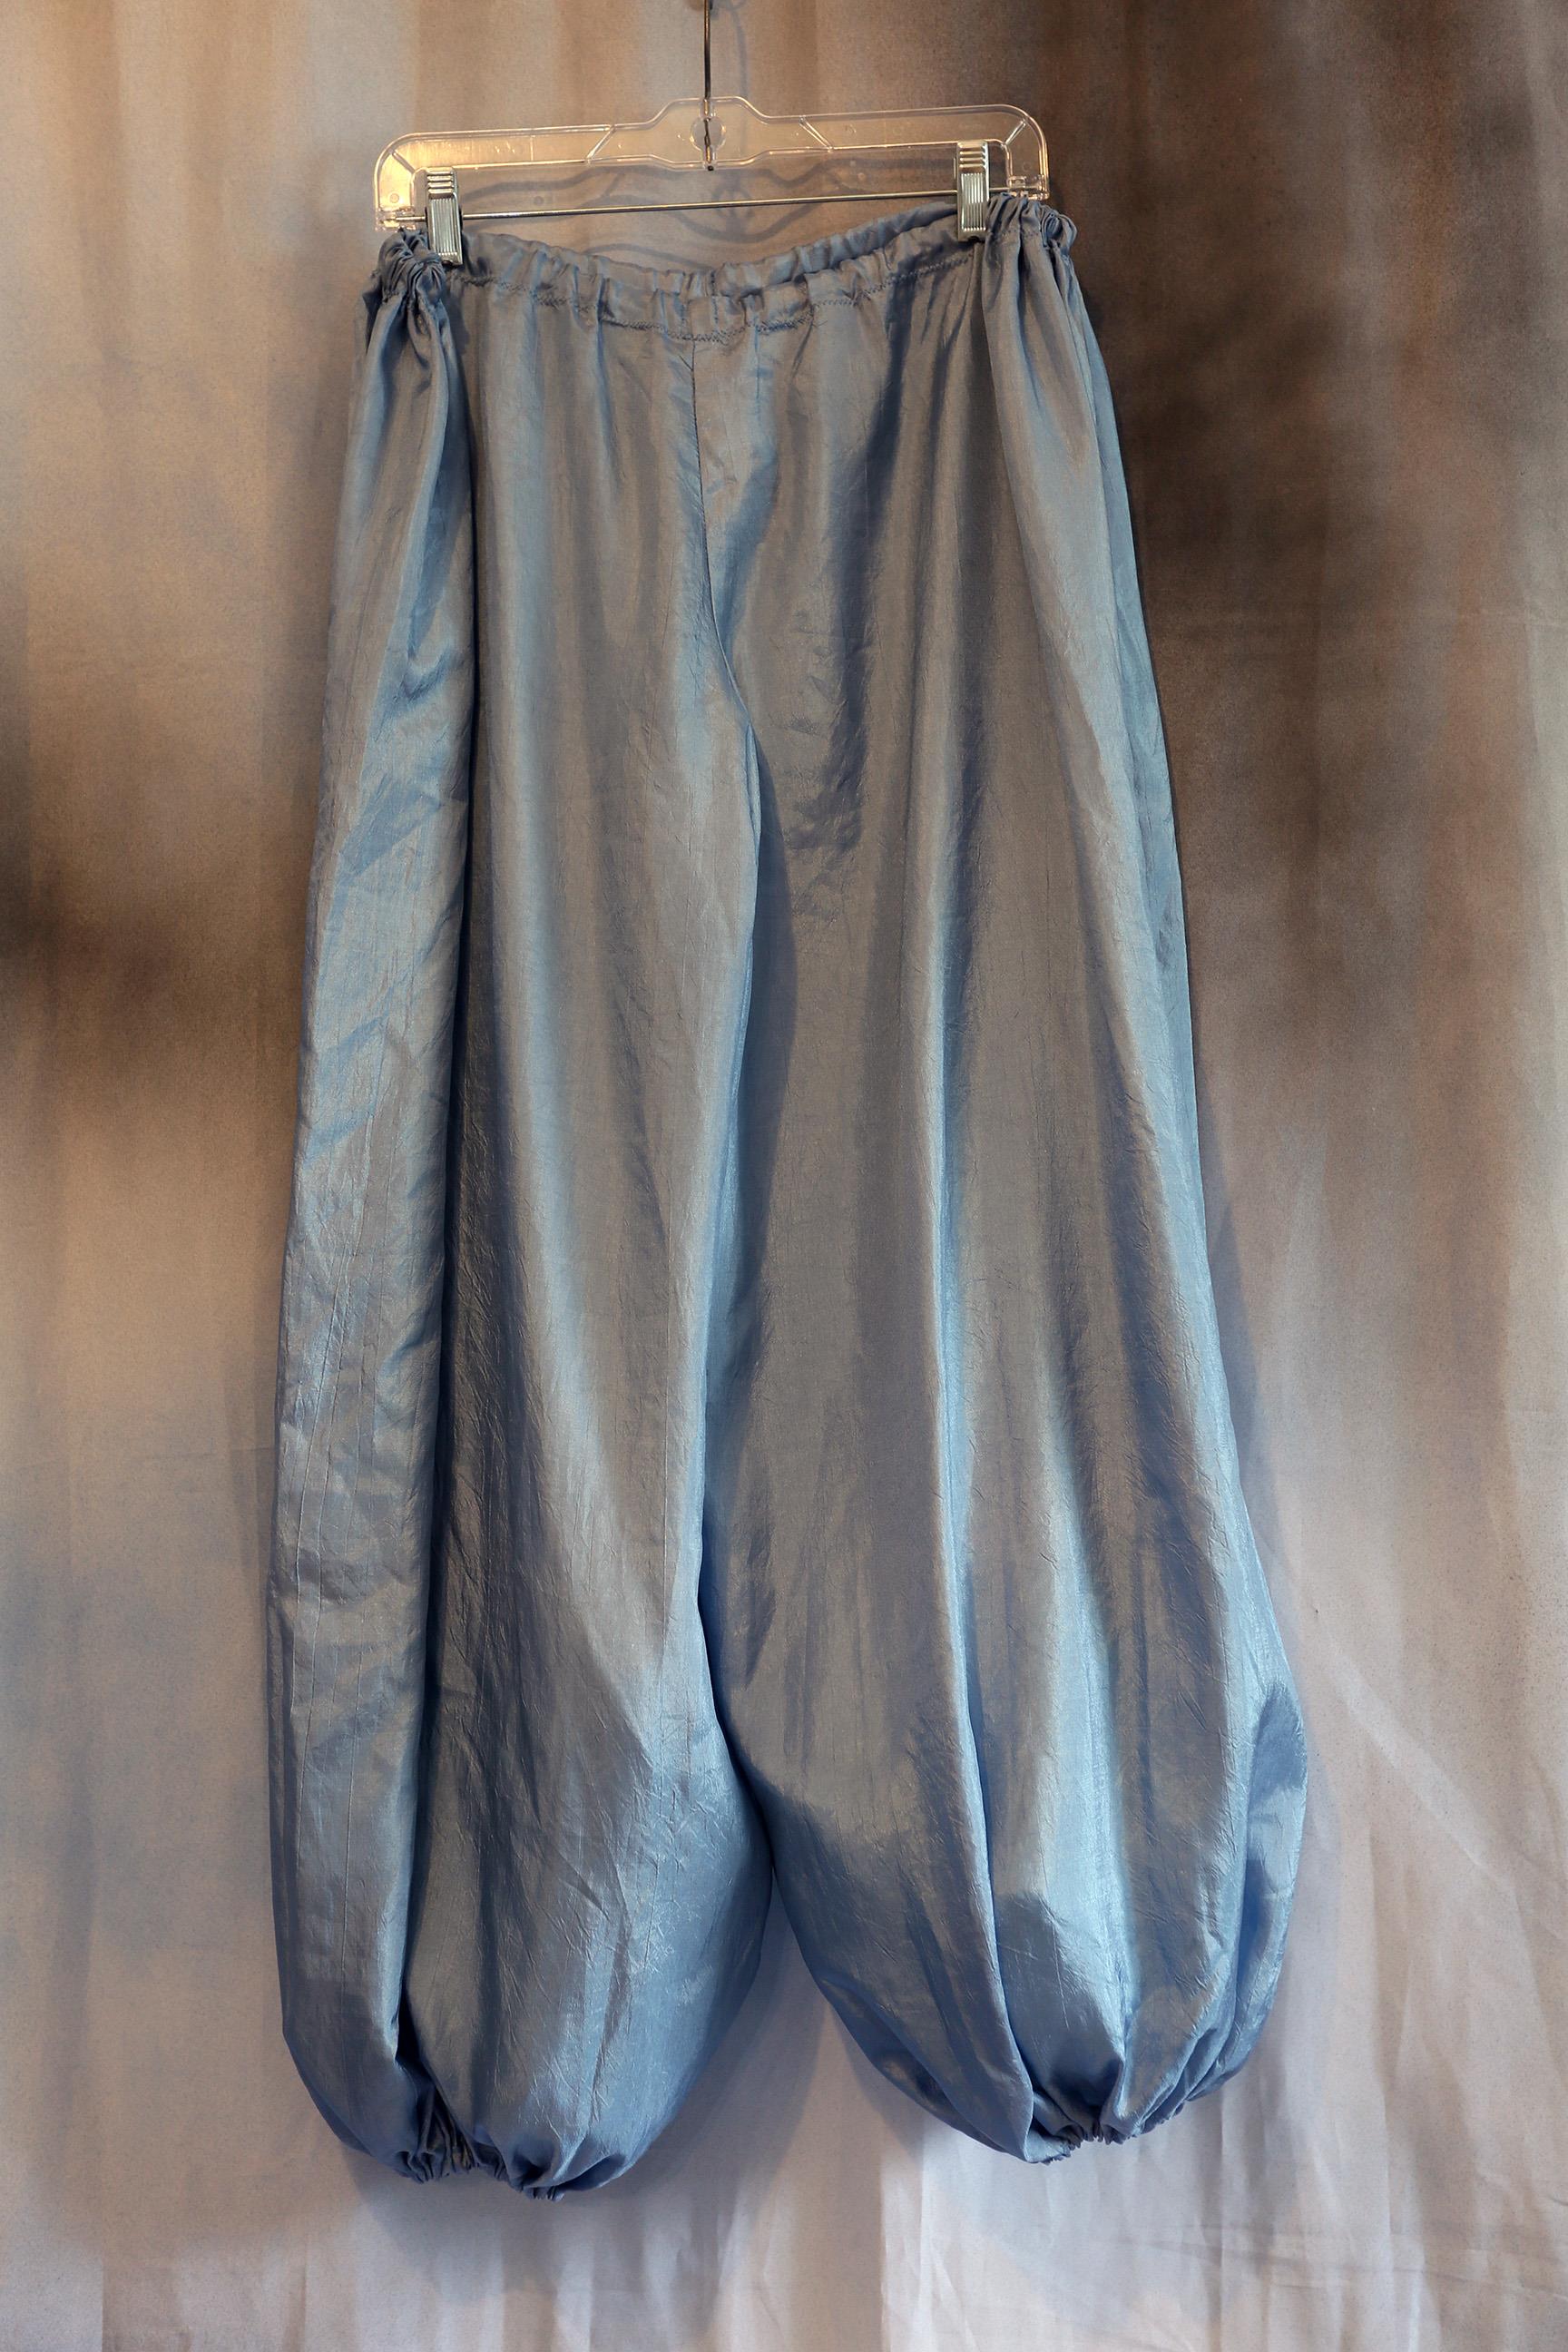 Pantaloons in silky soft gray no wrinkle fabric